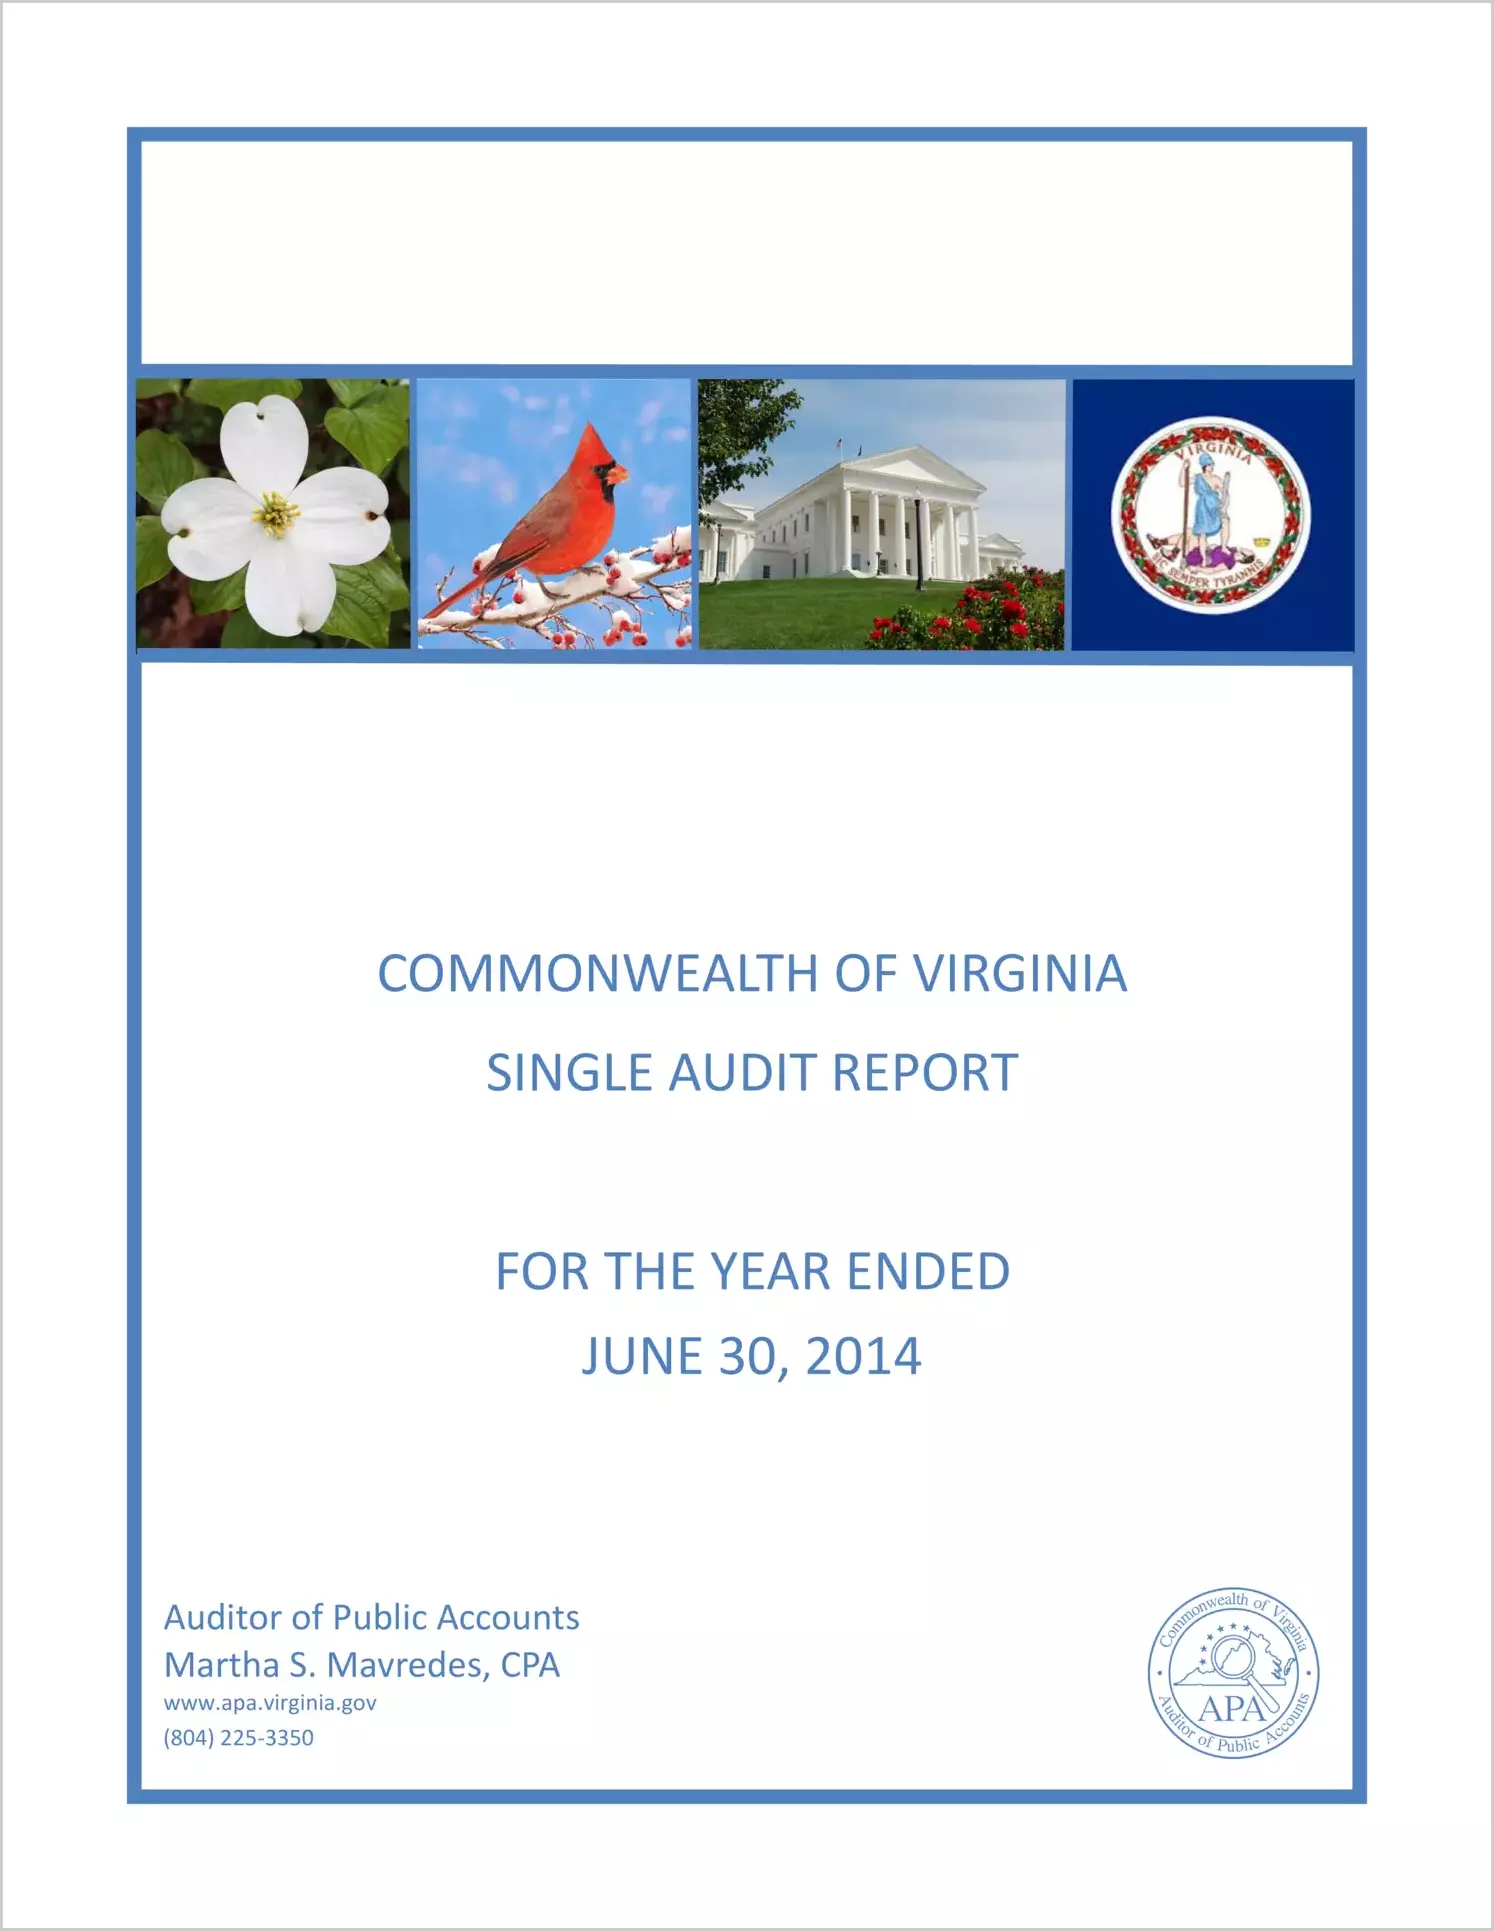 Commonwealth of Virginia Single Audit Report for the Year Ended June 30, 2014